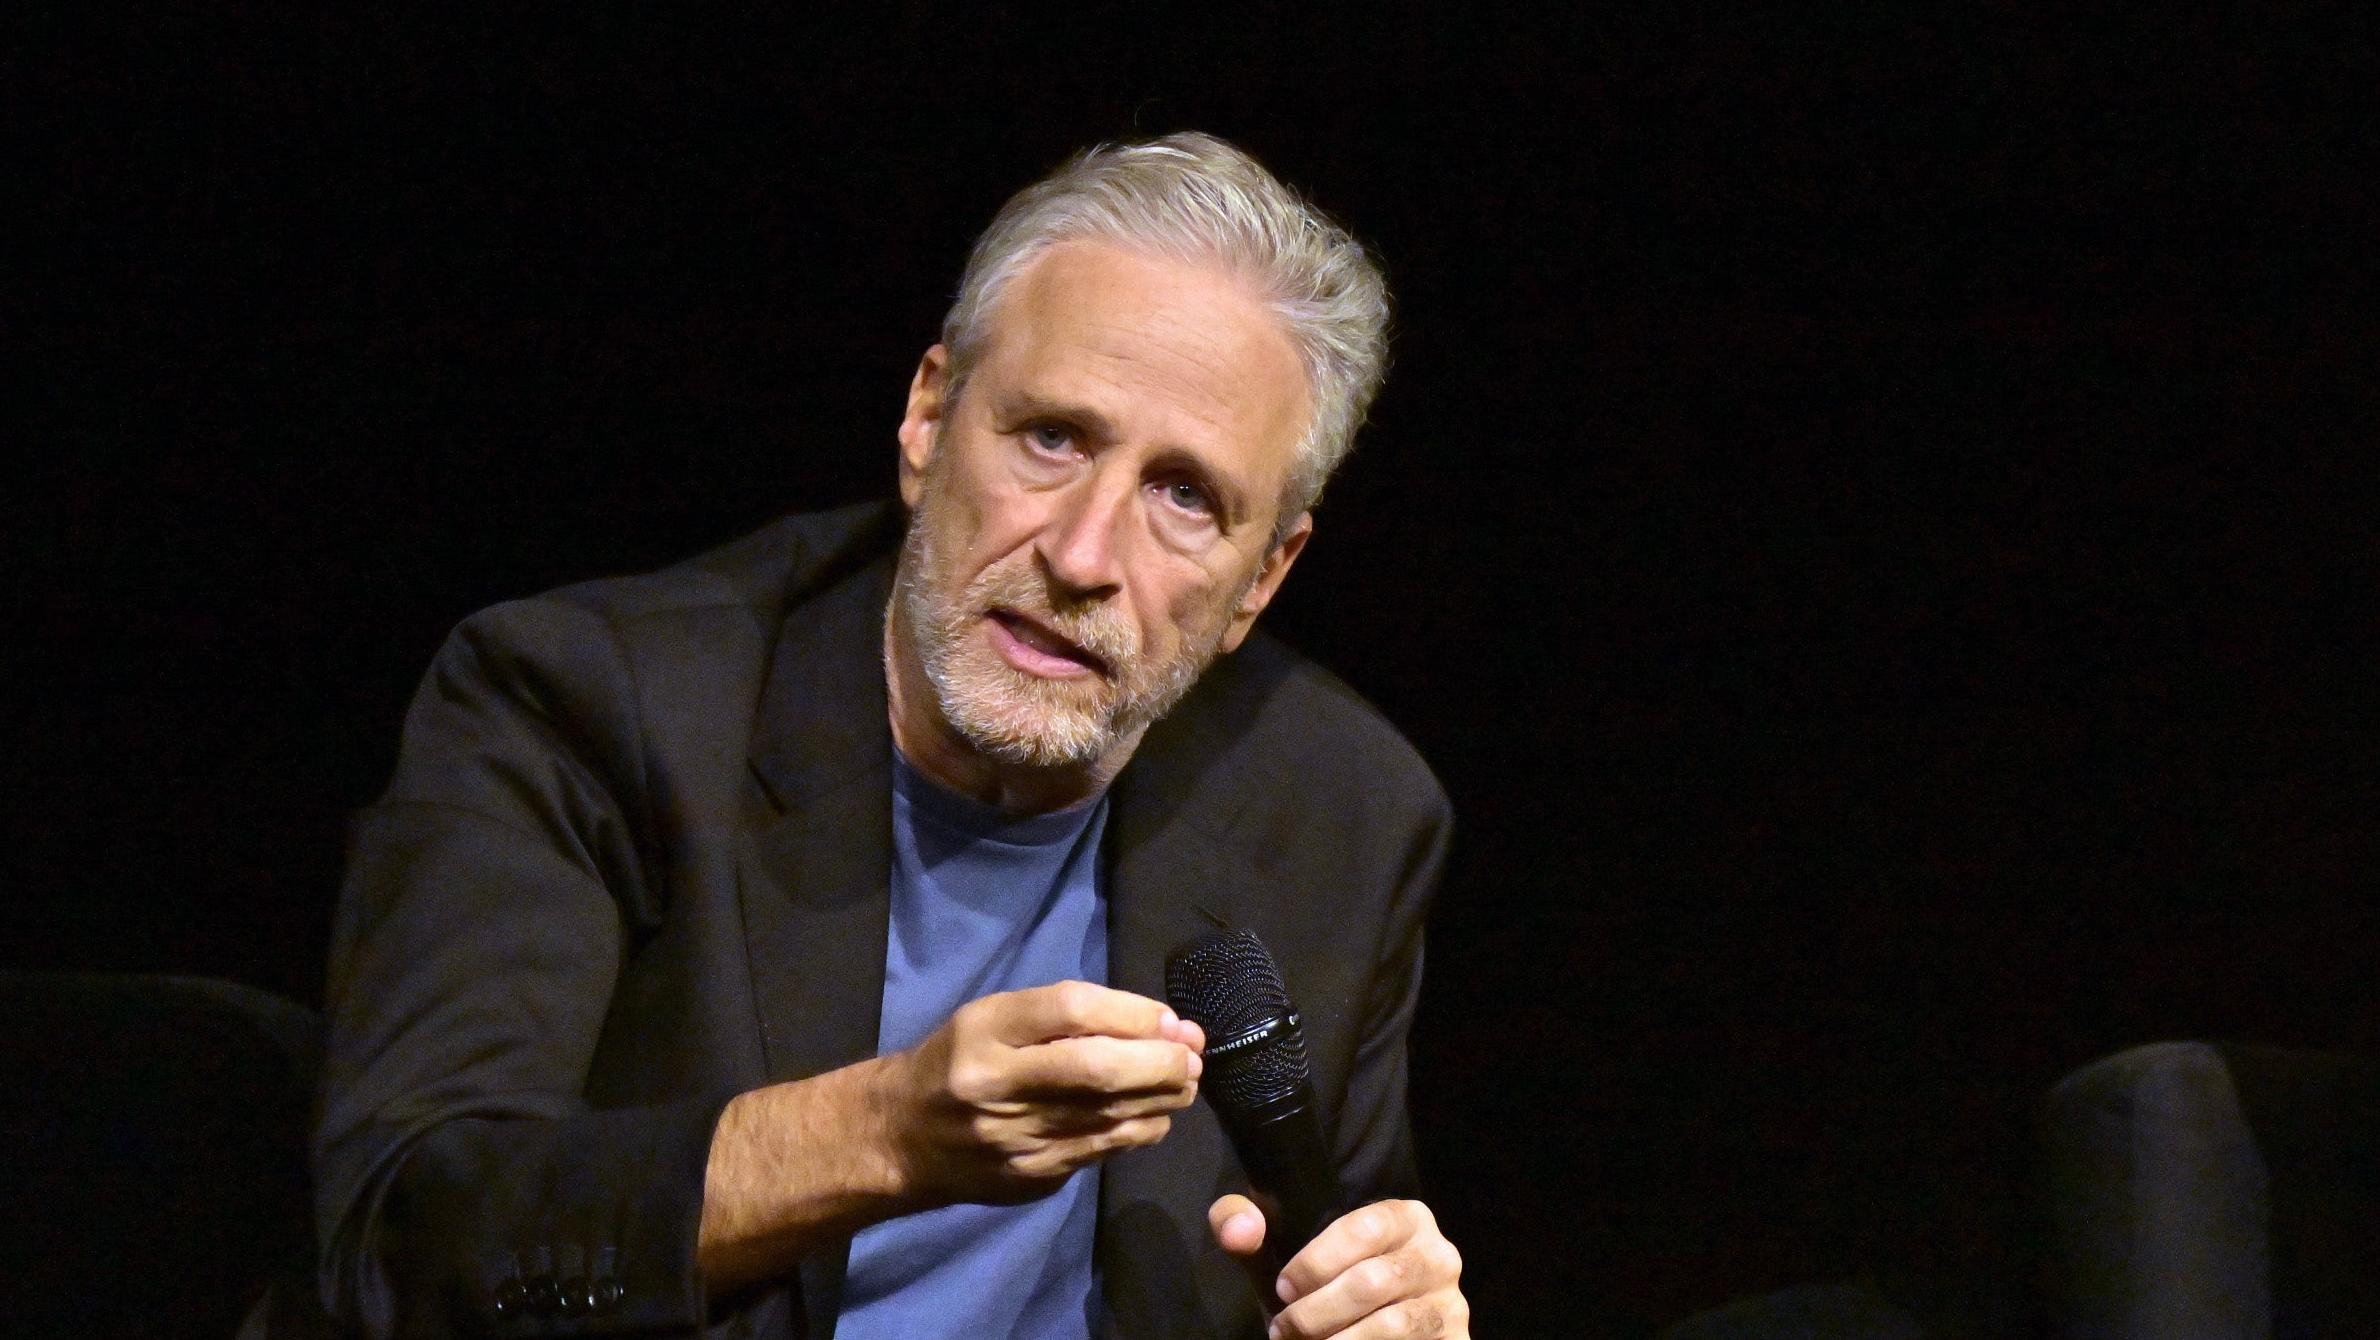 Jon Stewart talks about breaking things off with Apple: “Our aims don’t align in any way”